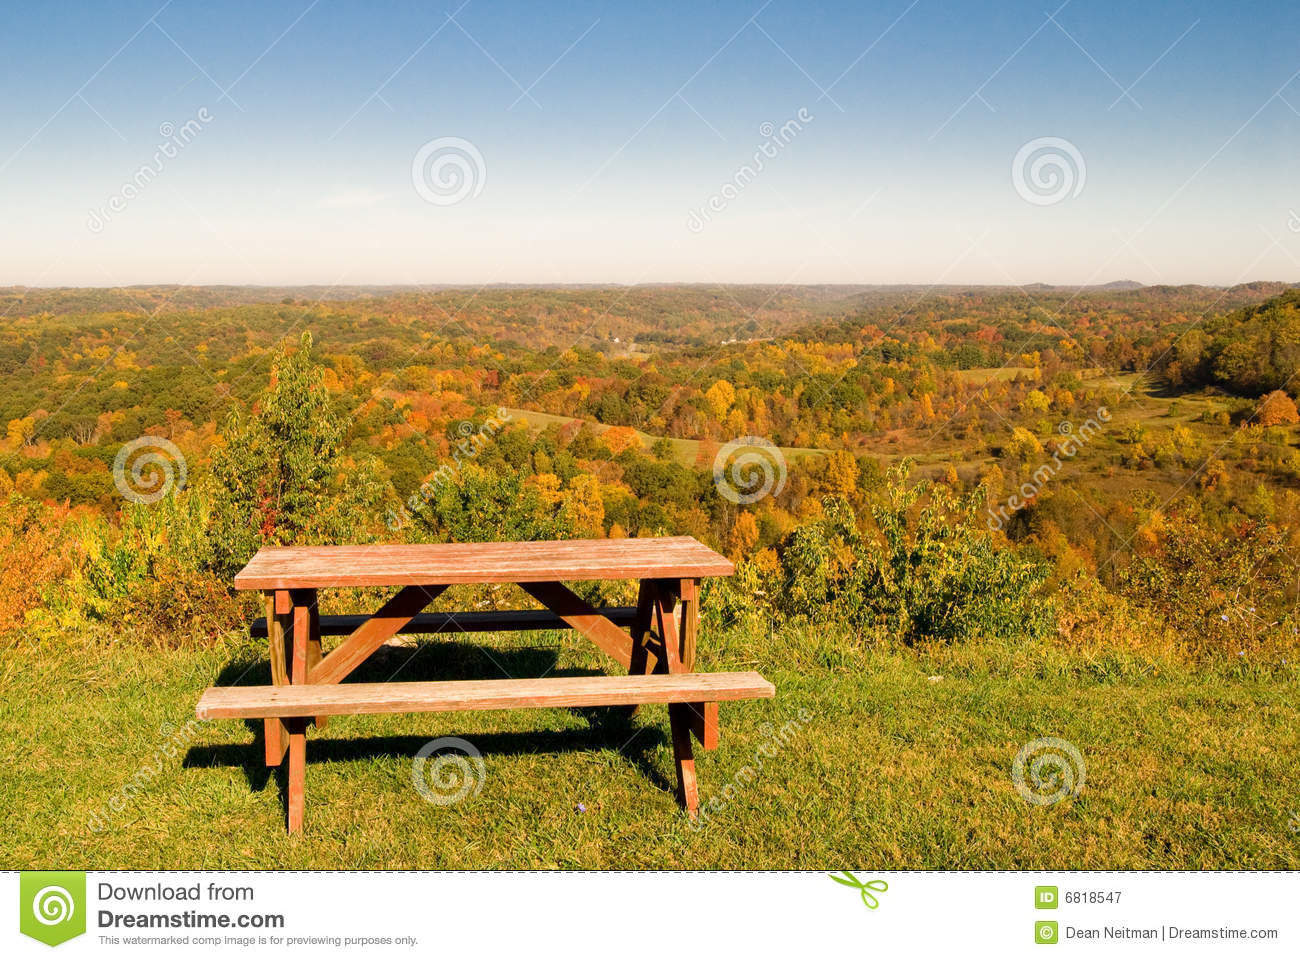 Picnic Table In Autumn Scene Royalty Free Stock Photography   Image